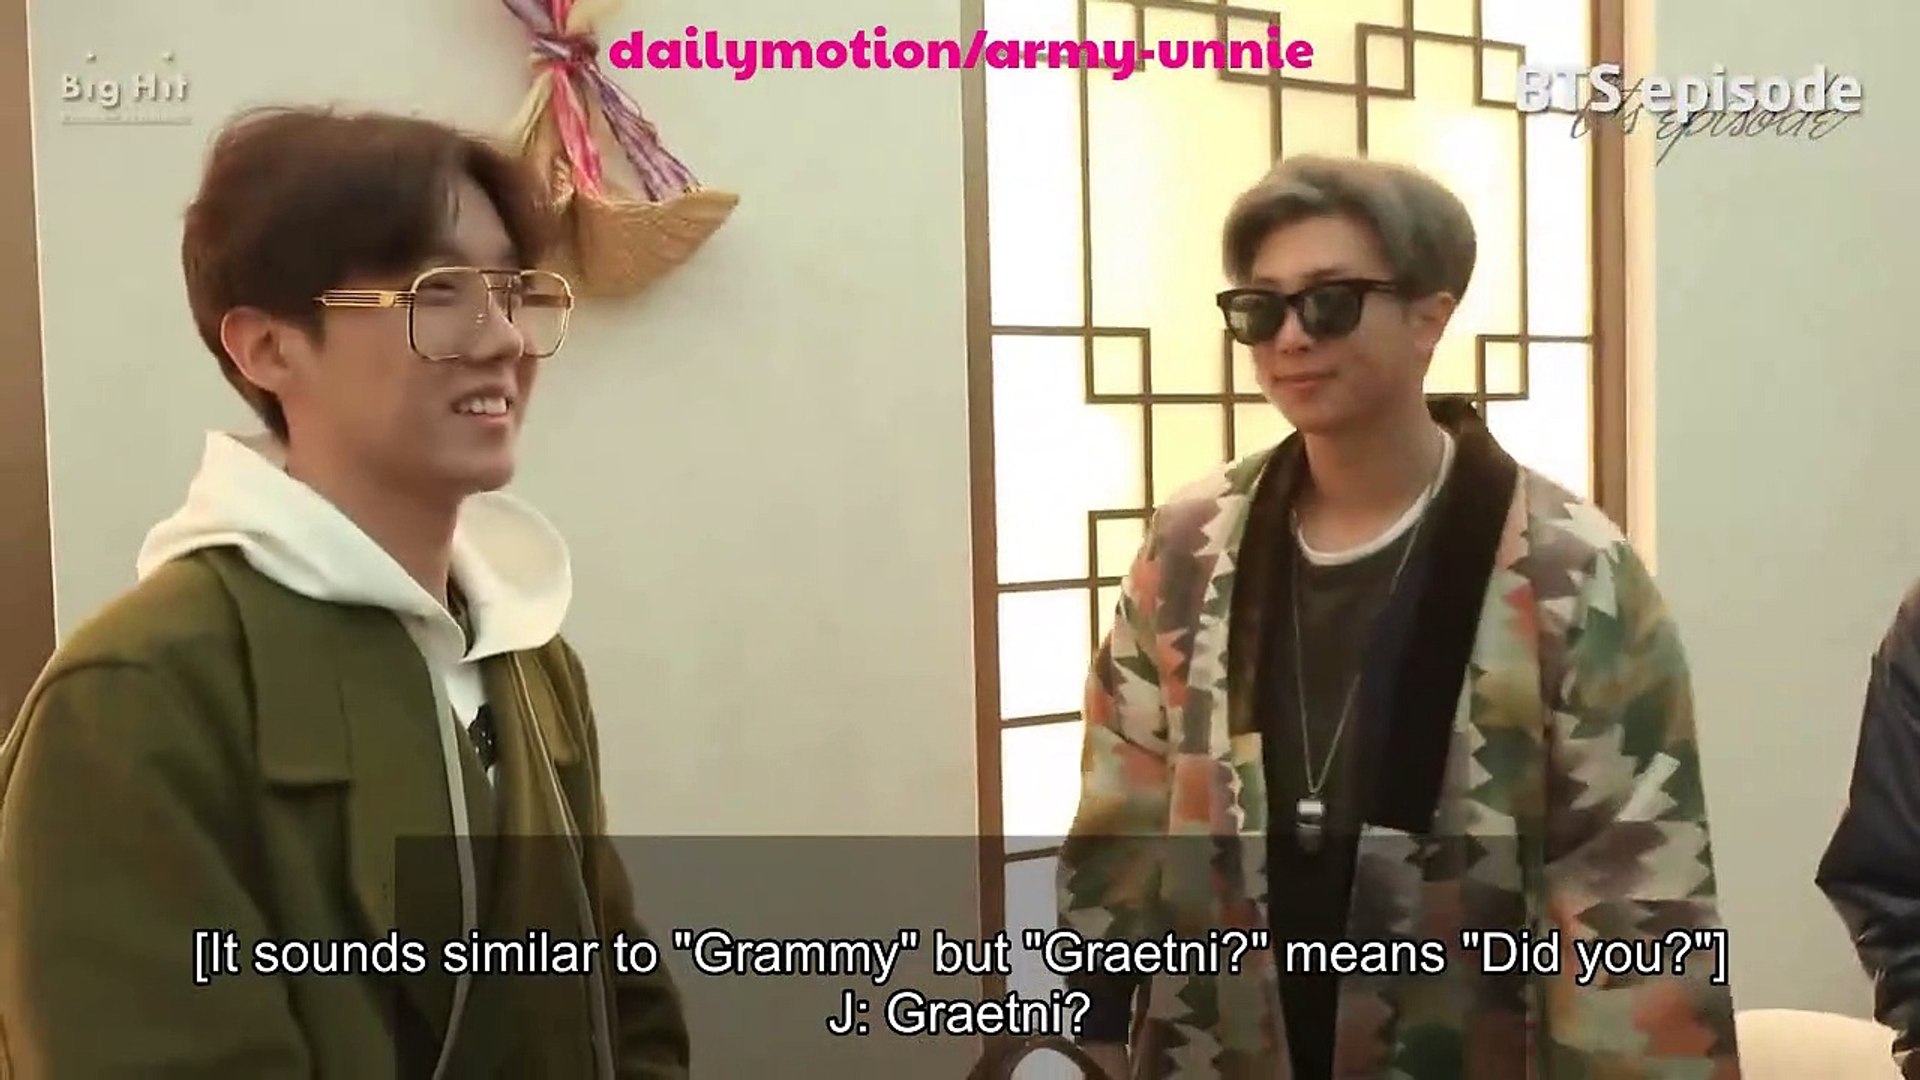 ENG] BTS NOMINATED FOR BEST POP DUO OR GROUP PERFORMANCE AT 64TH GRAMMY  AWARDS! - video Dailymotion